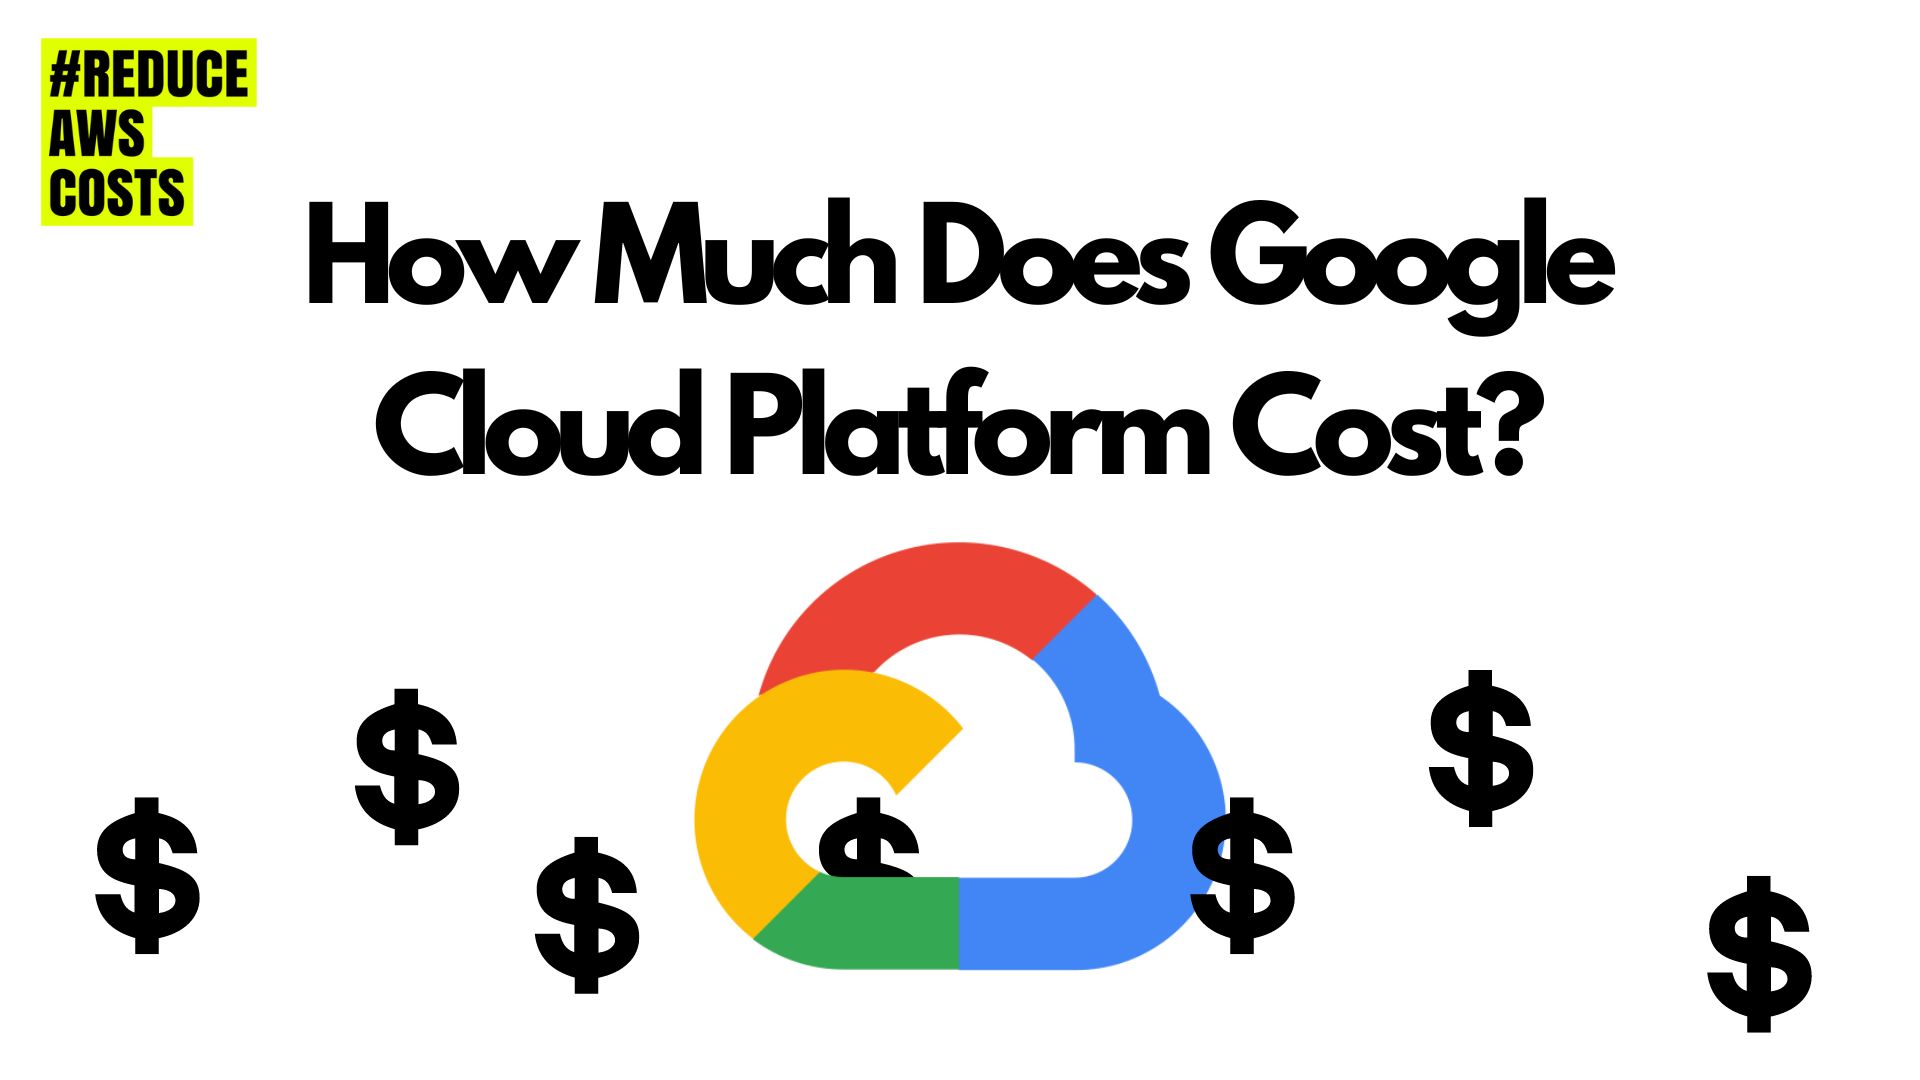 How Much Does Google Cloud Platform Cost?